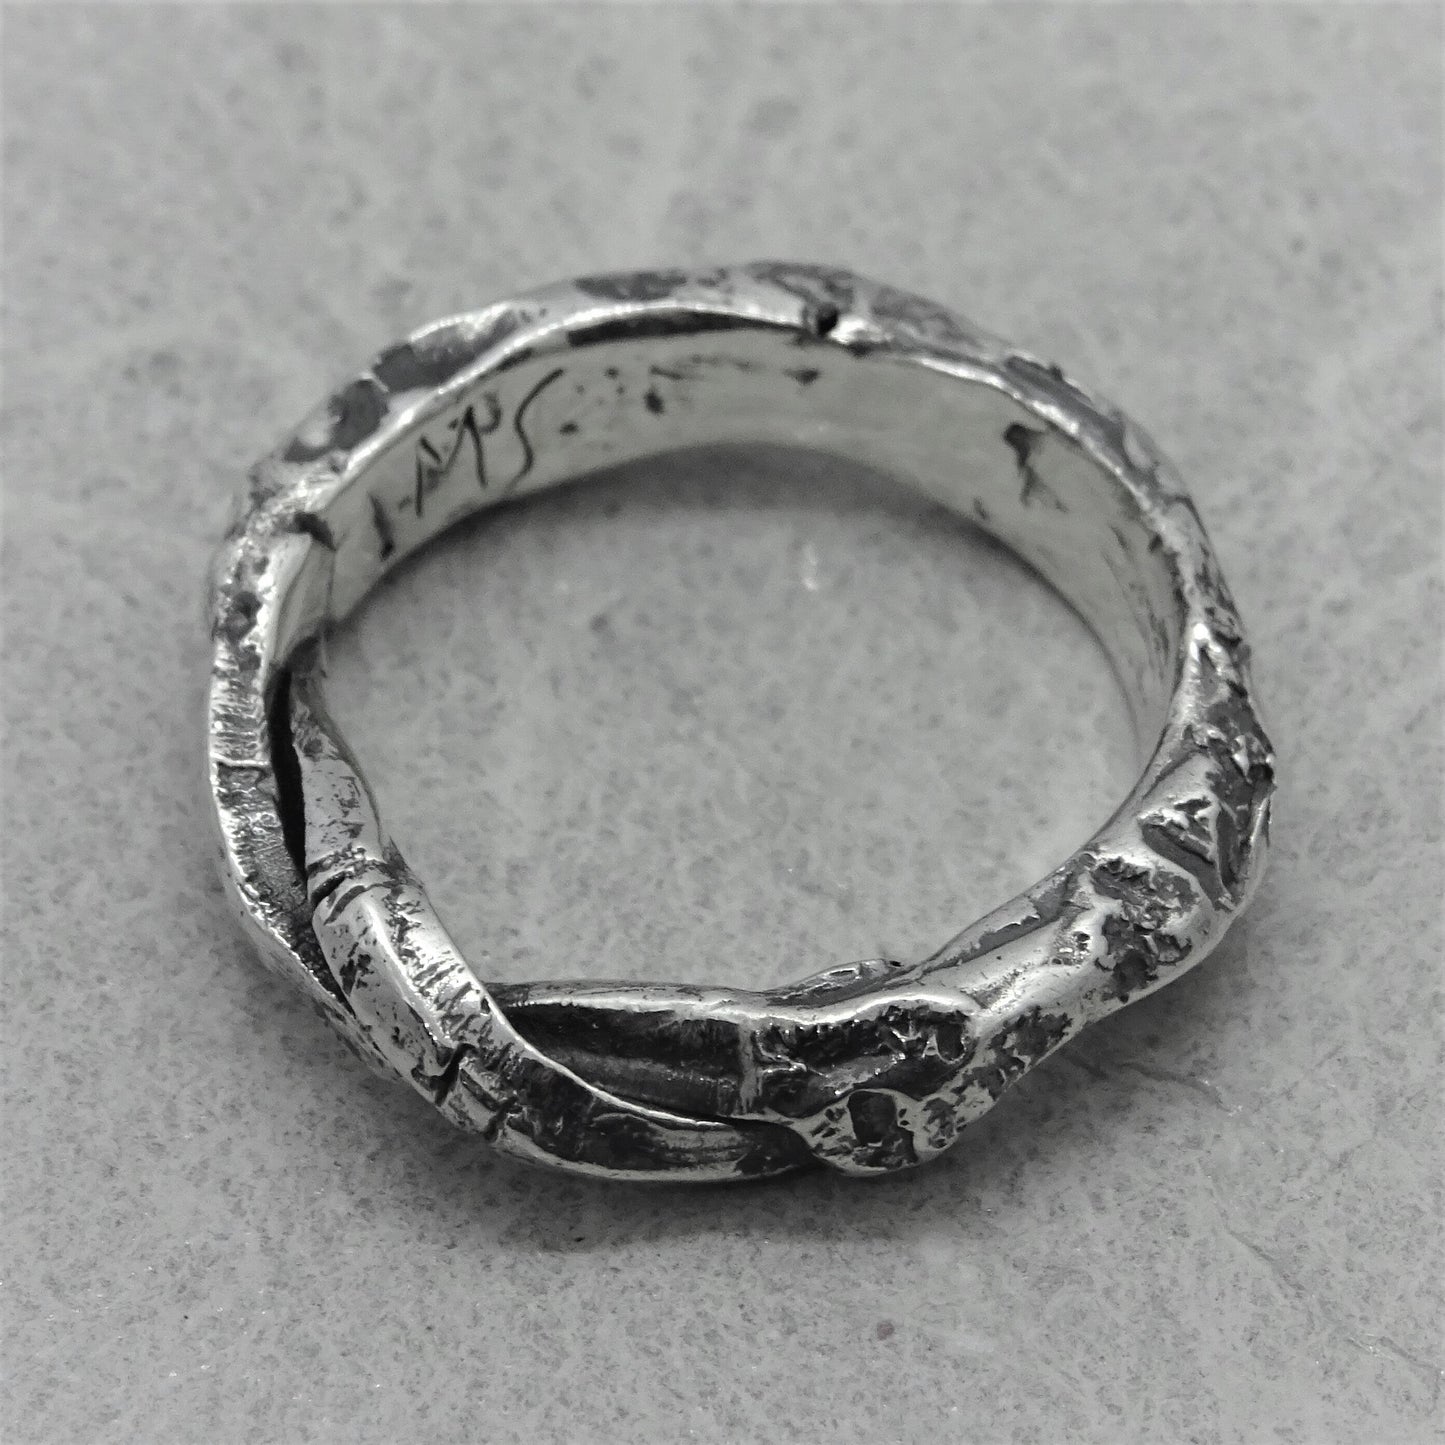 Twist ring- A thin twisted ring with an interesting stone texture Lightweight rings Project50g 